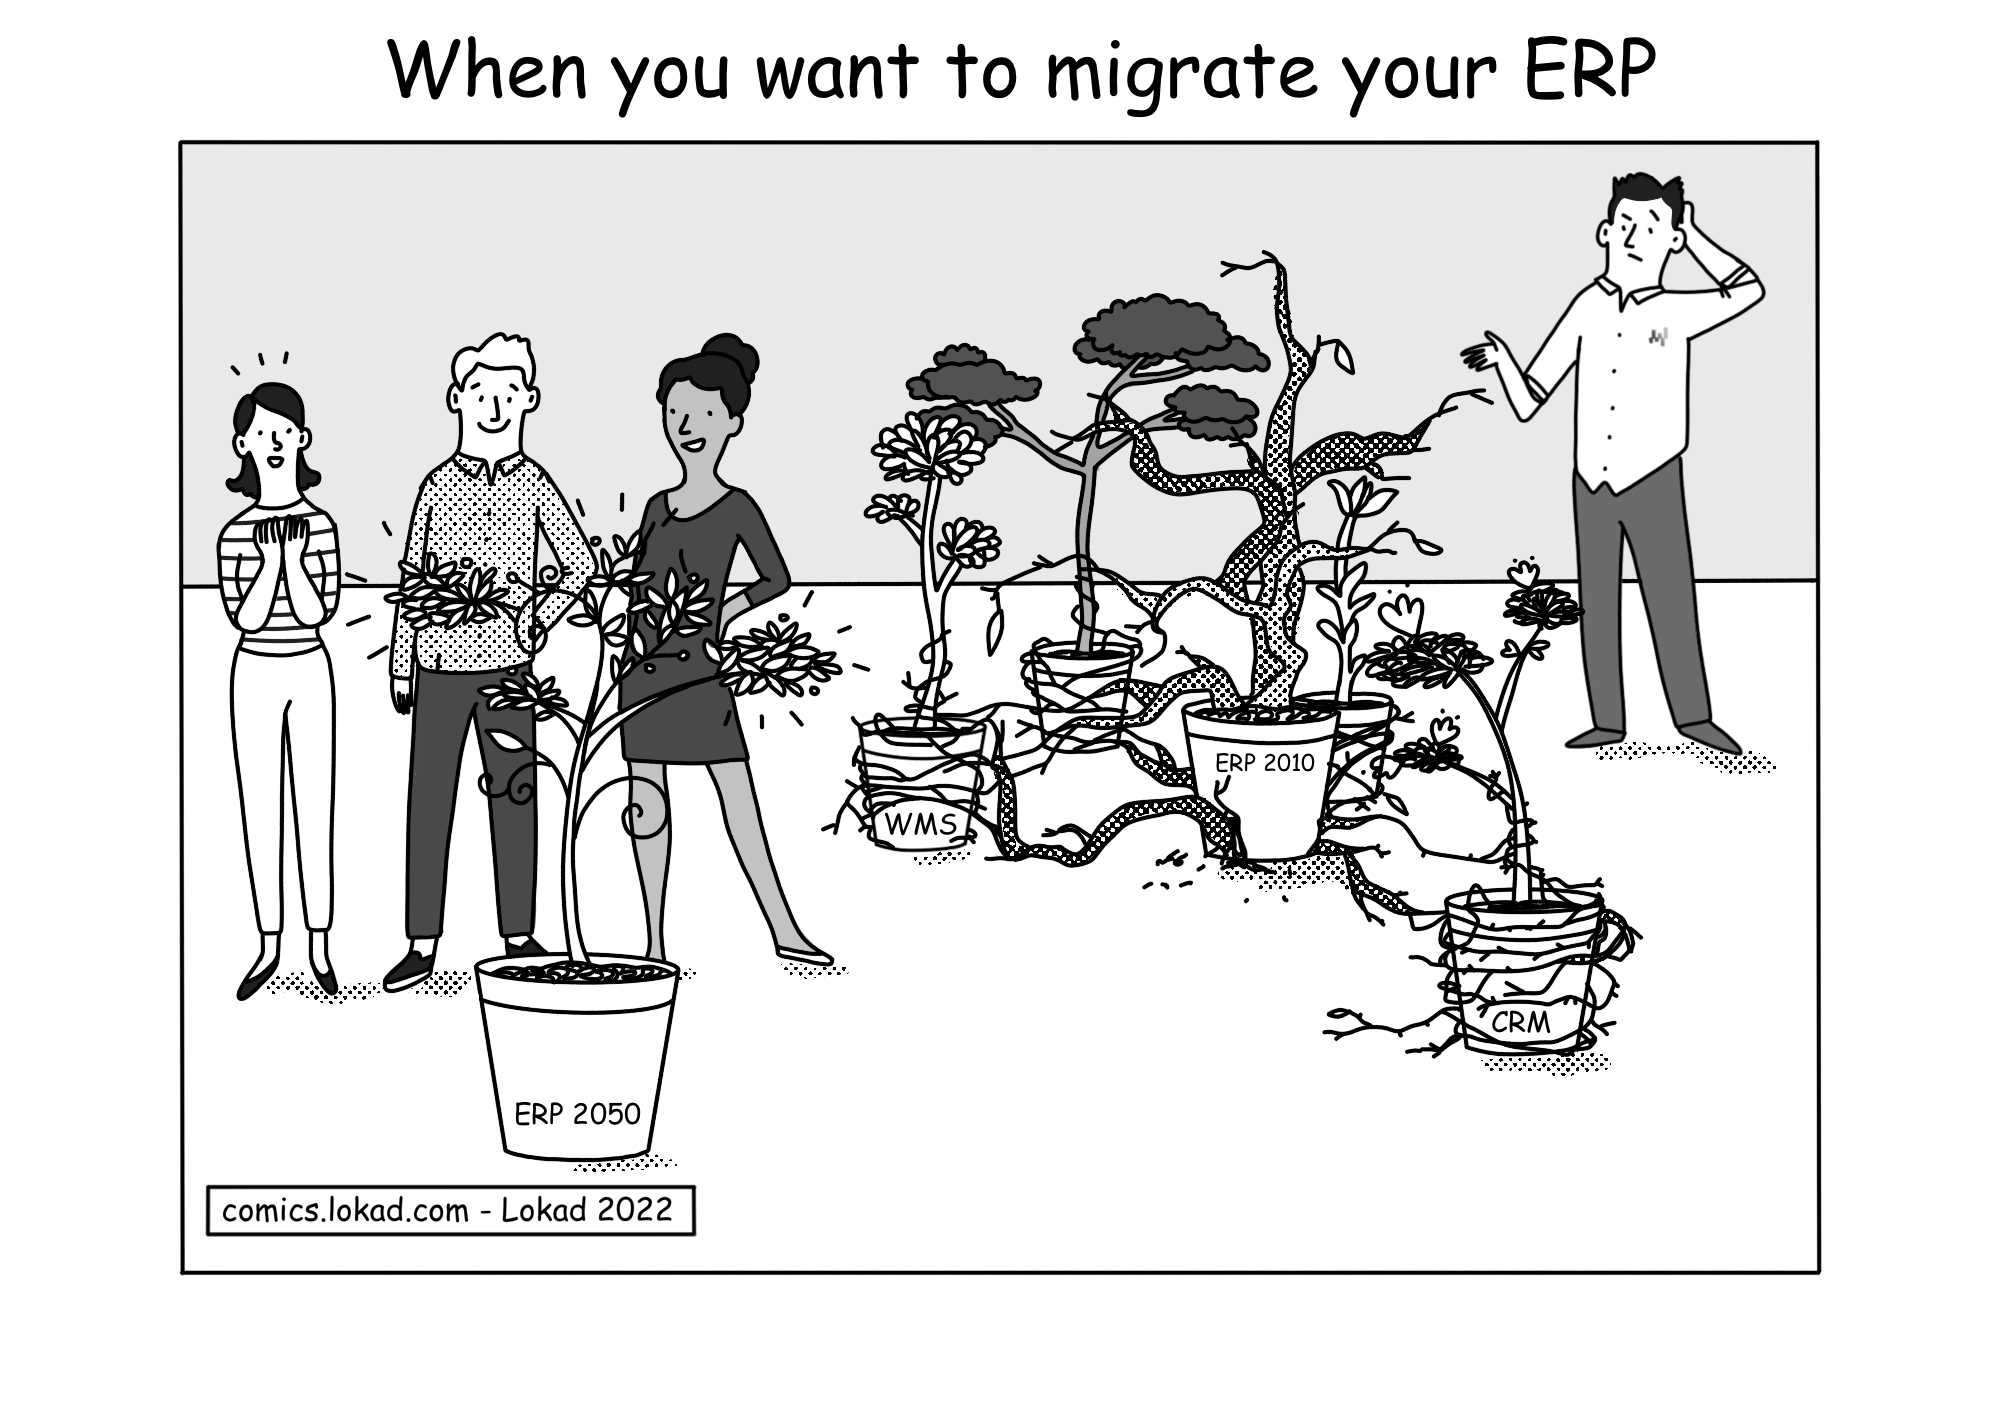 When you want to migrate your ERP